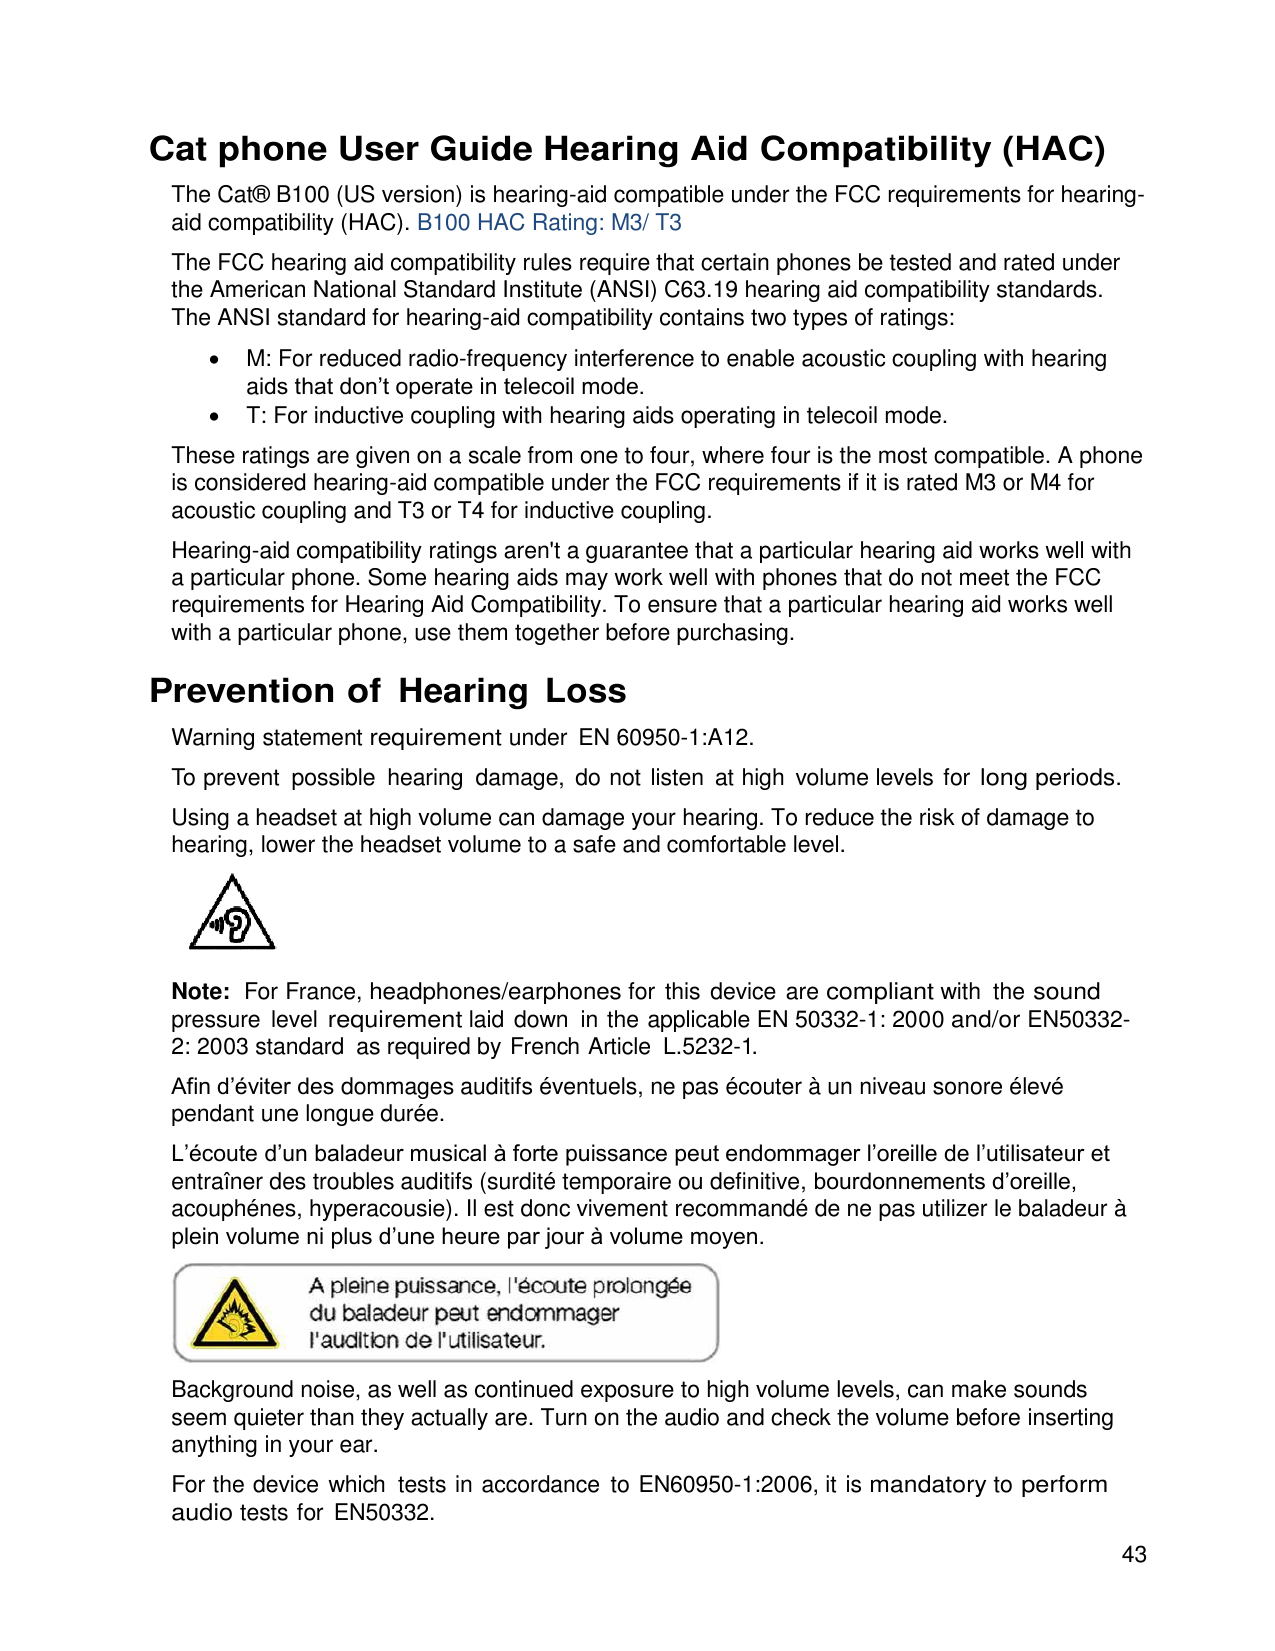 Cat phone User Guide Hearing Aid Compatibility (HAC)The Cat® B100 (US version) is hearing-aid compatible under the FCC requireme